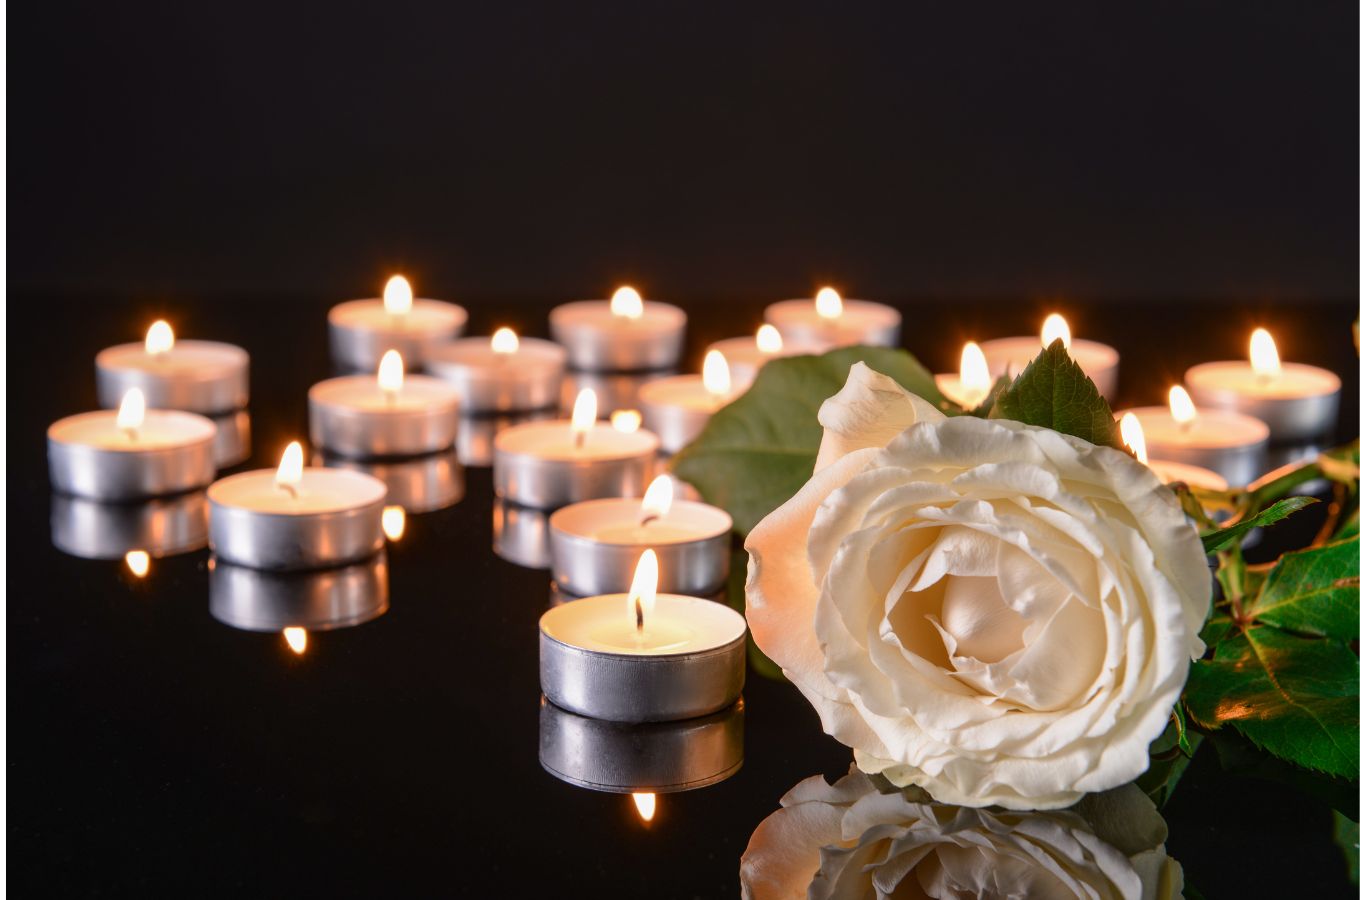 White flowers and candles